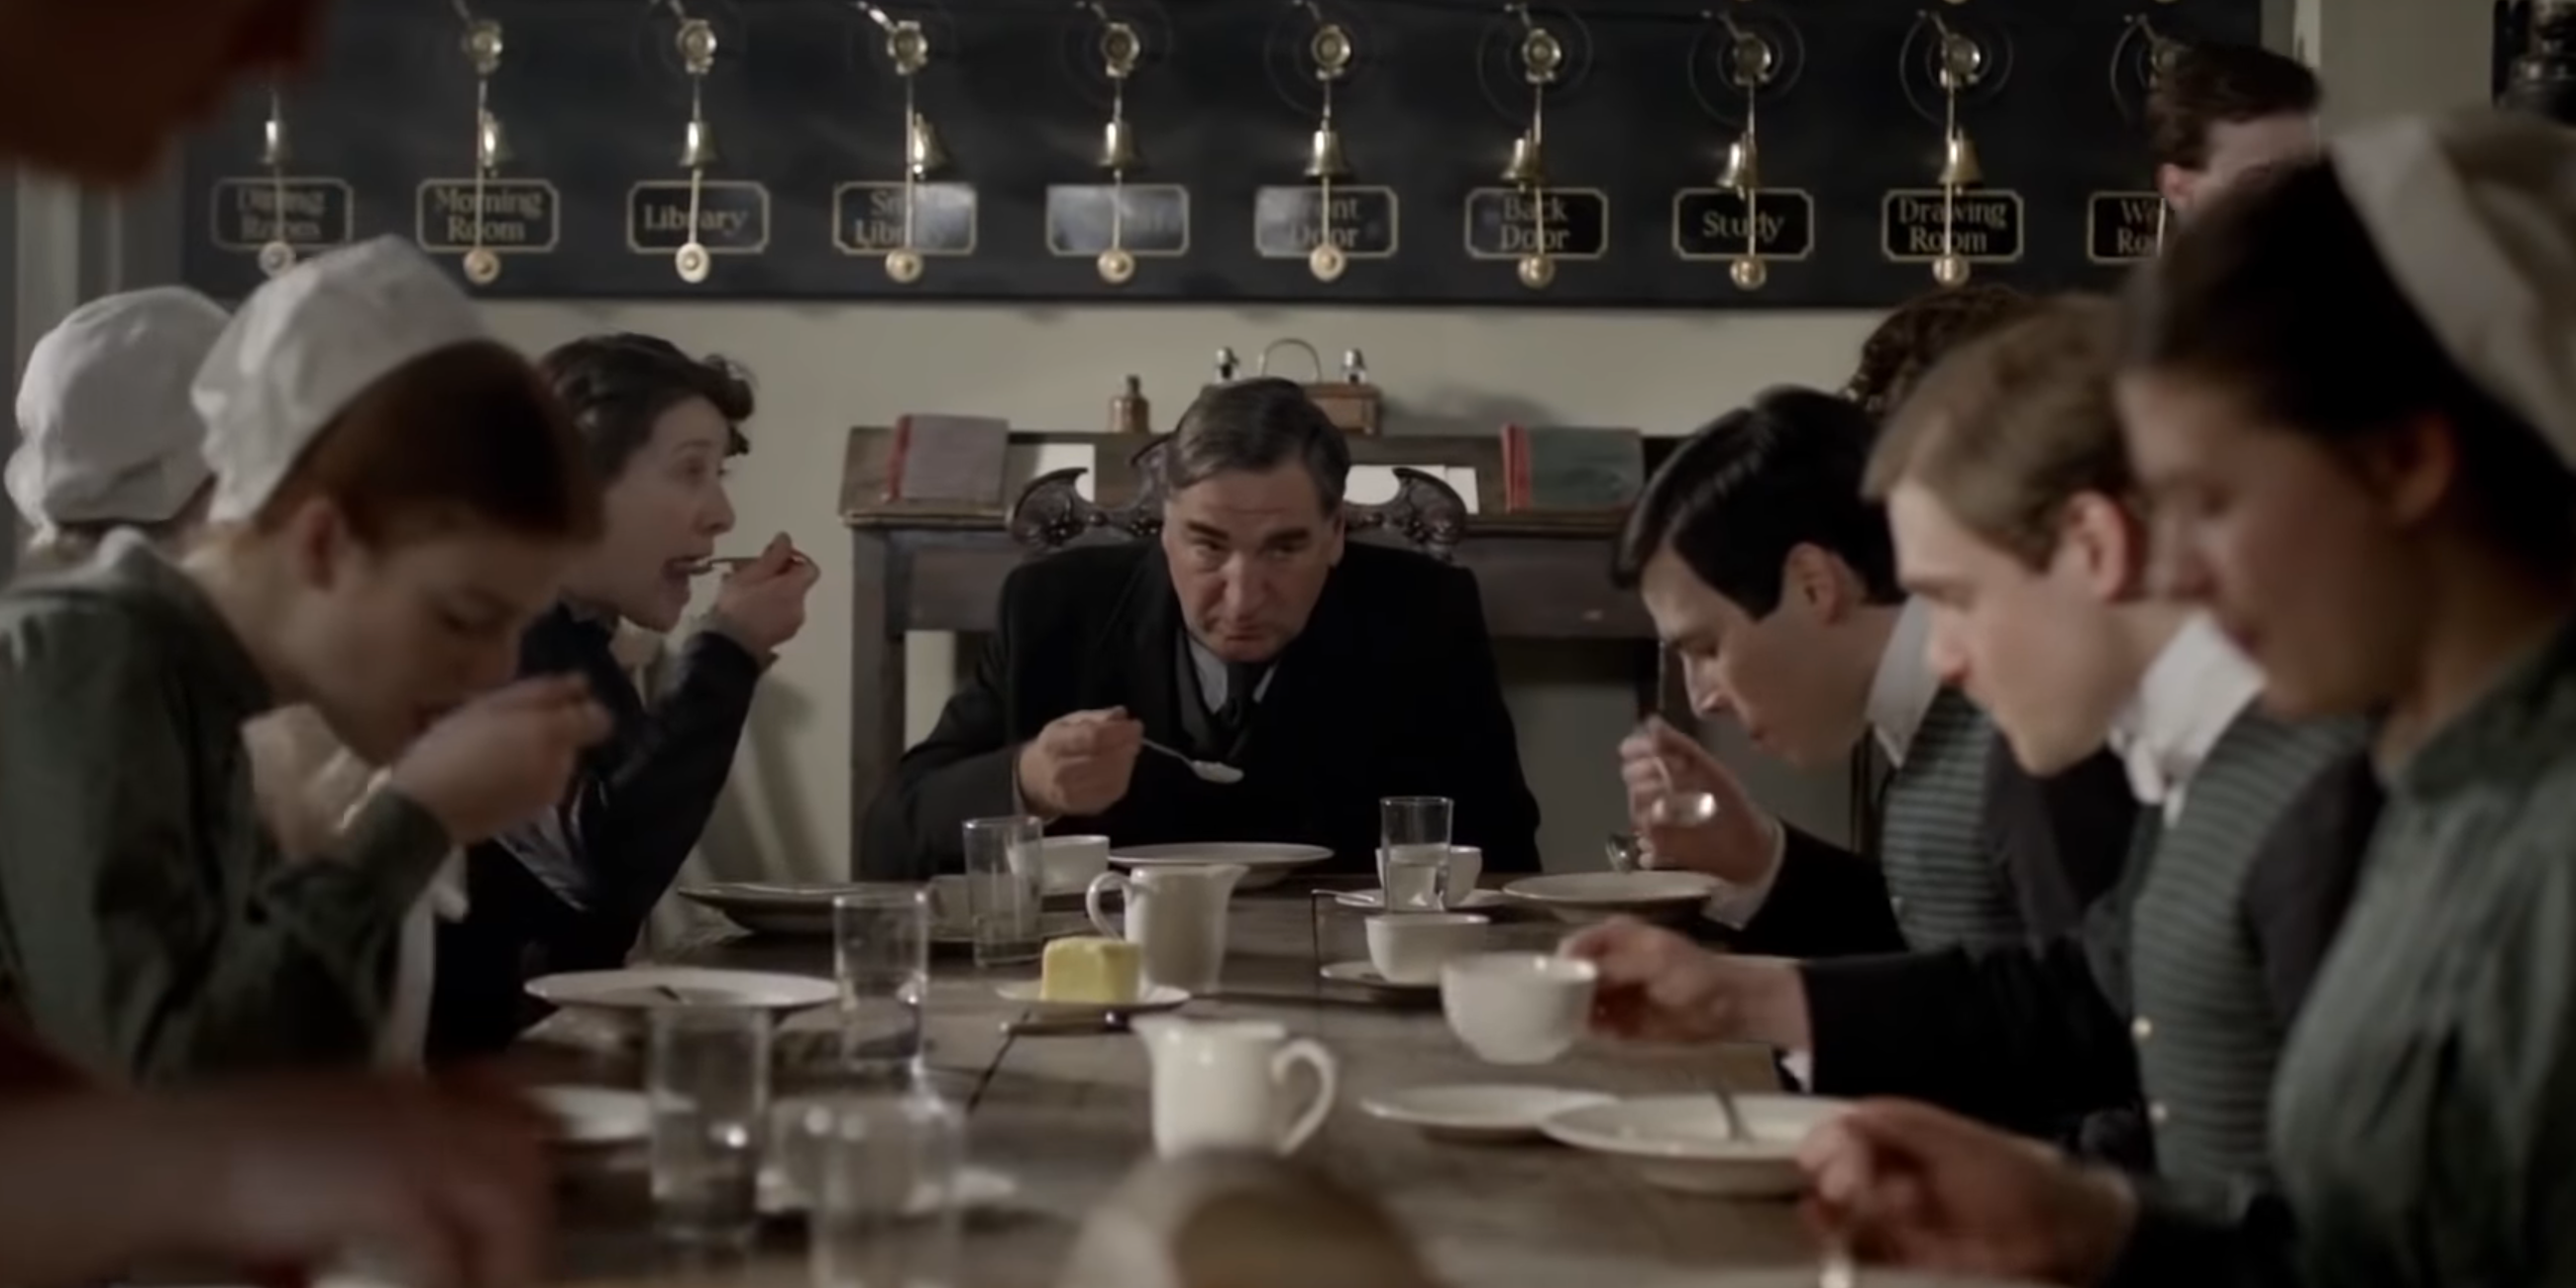 Downton Abbey's service staff eating dinner together with Carson heading the table.